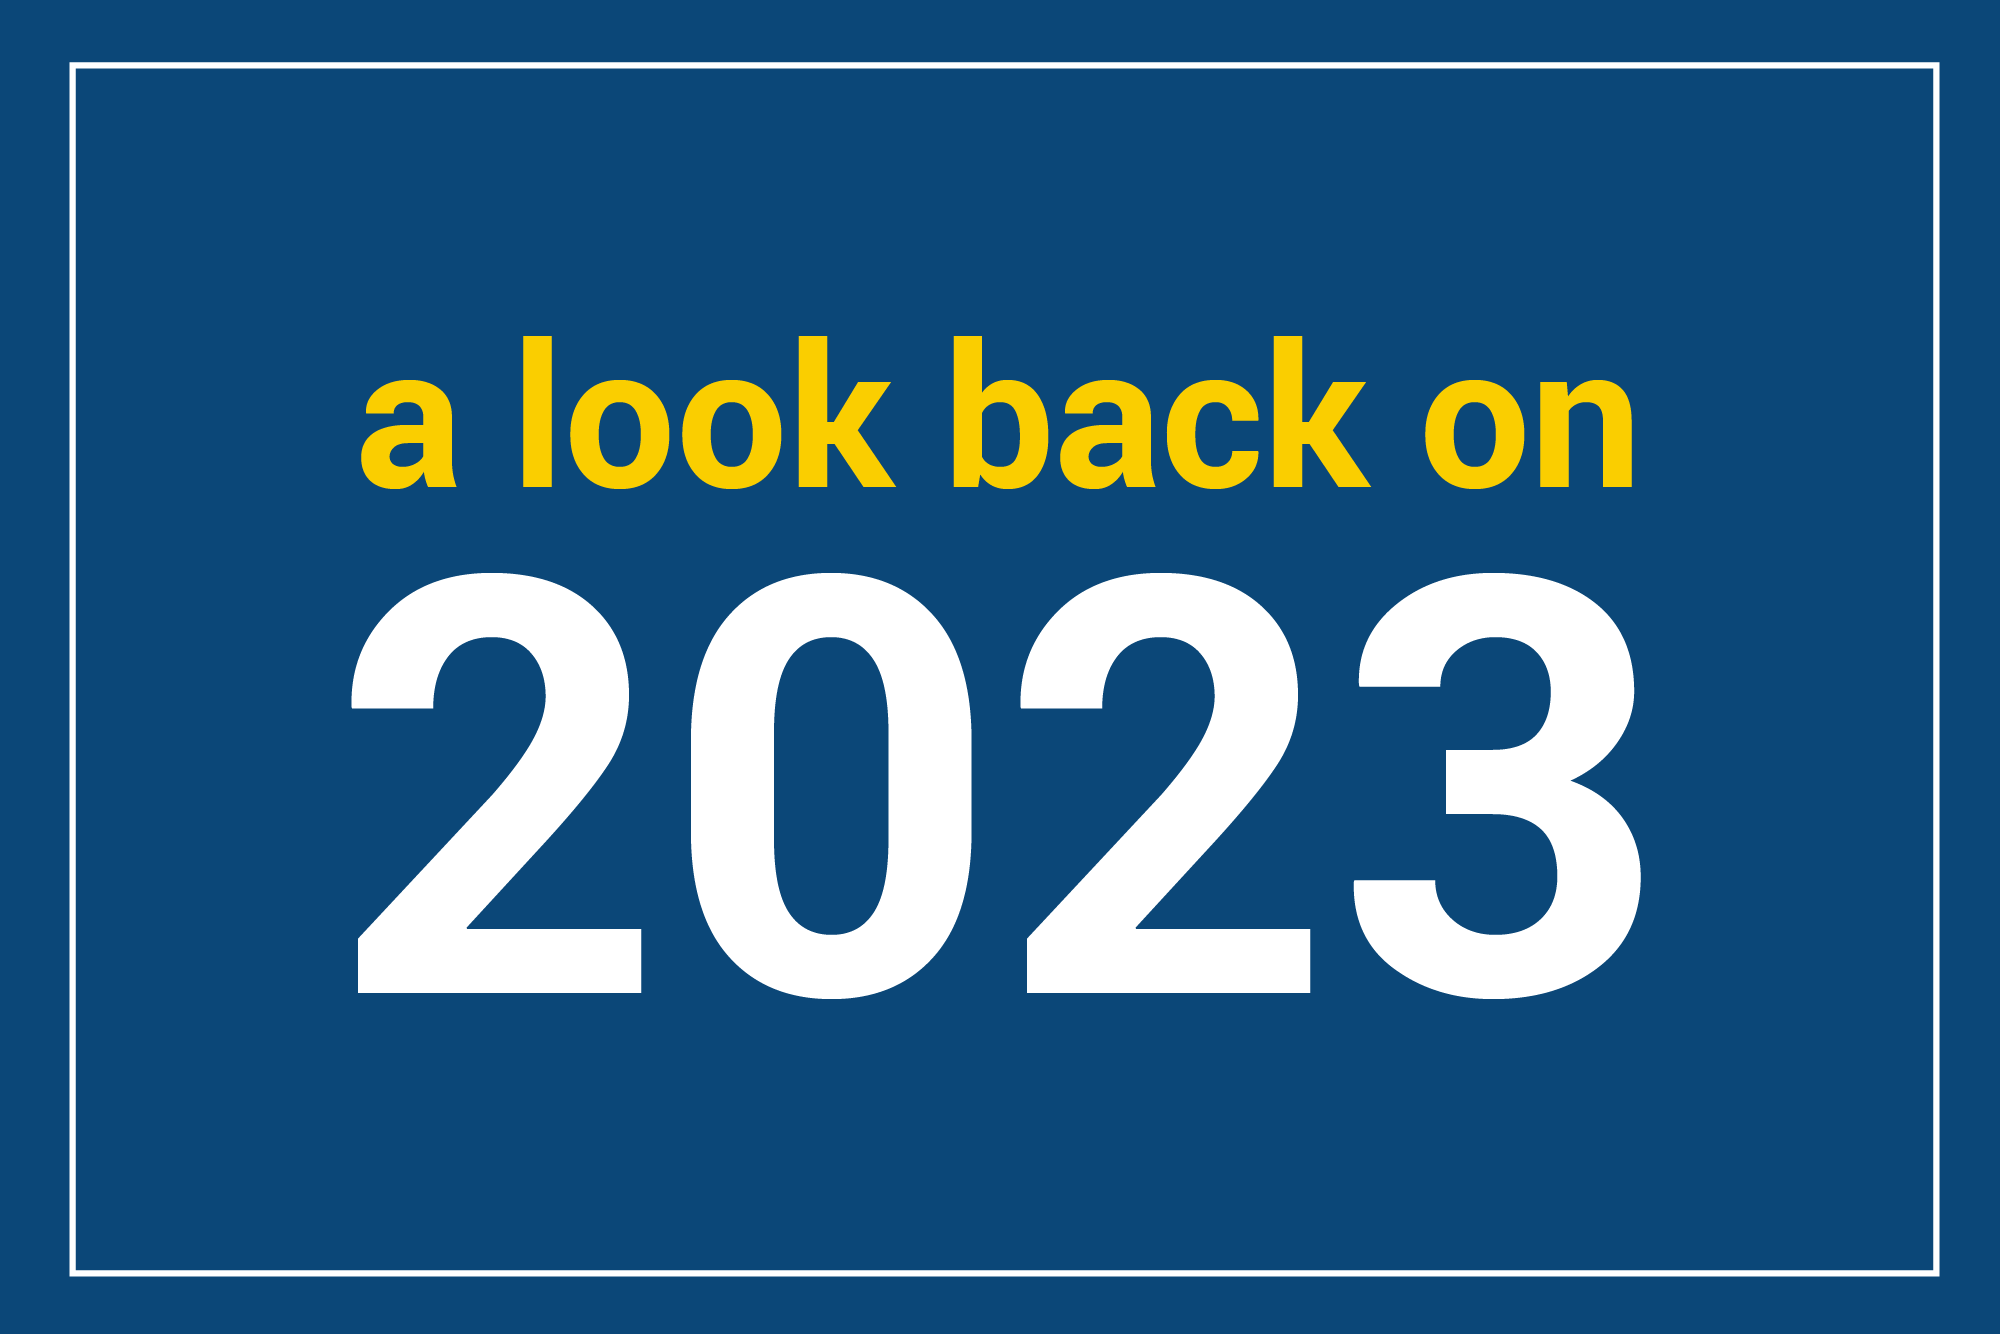 Blue card with text: A look back on 2023